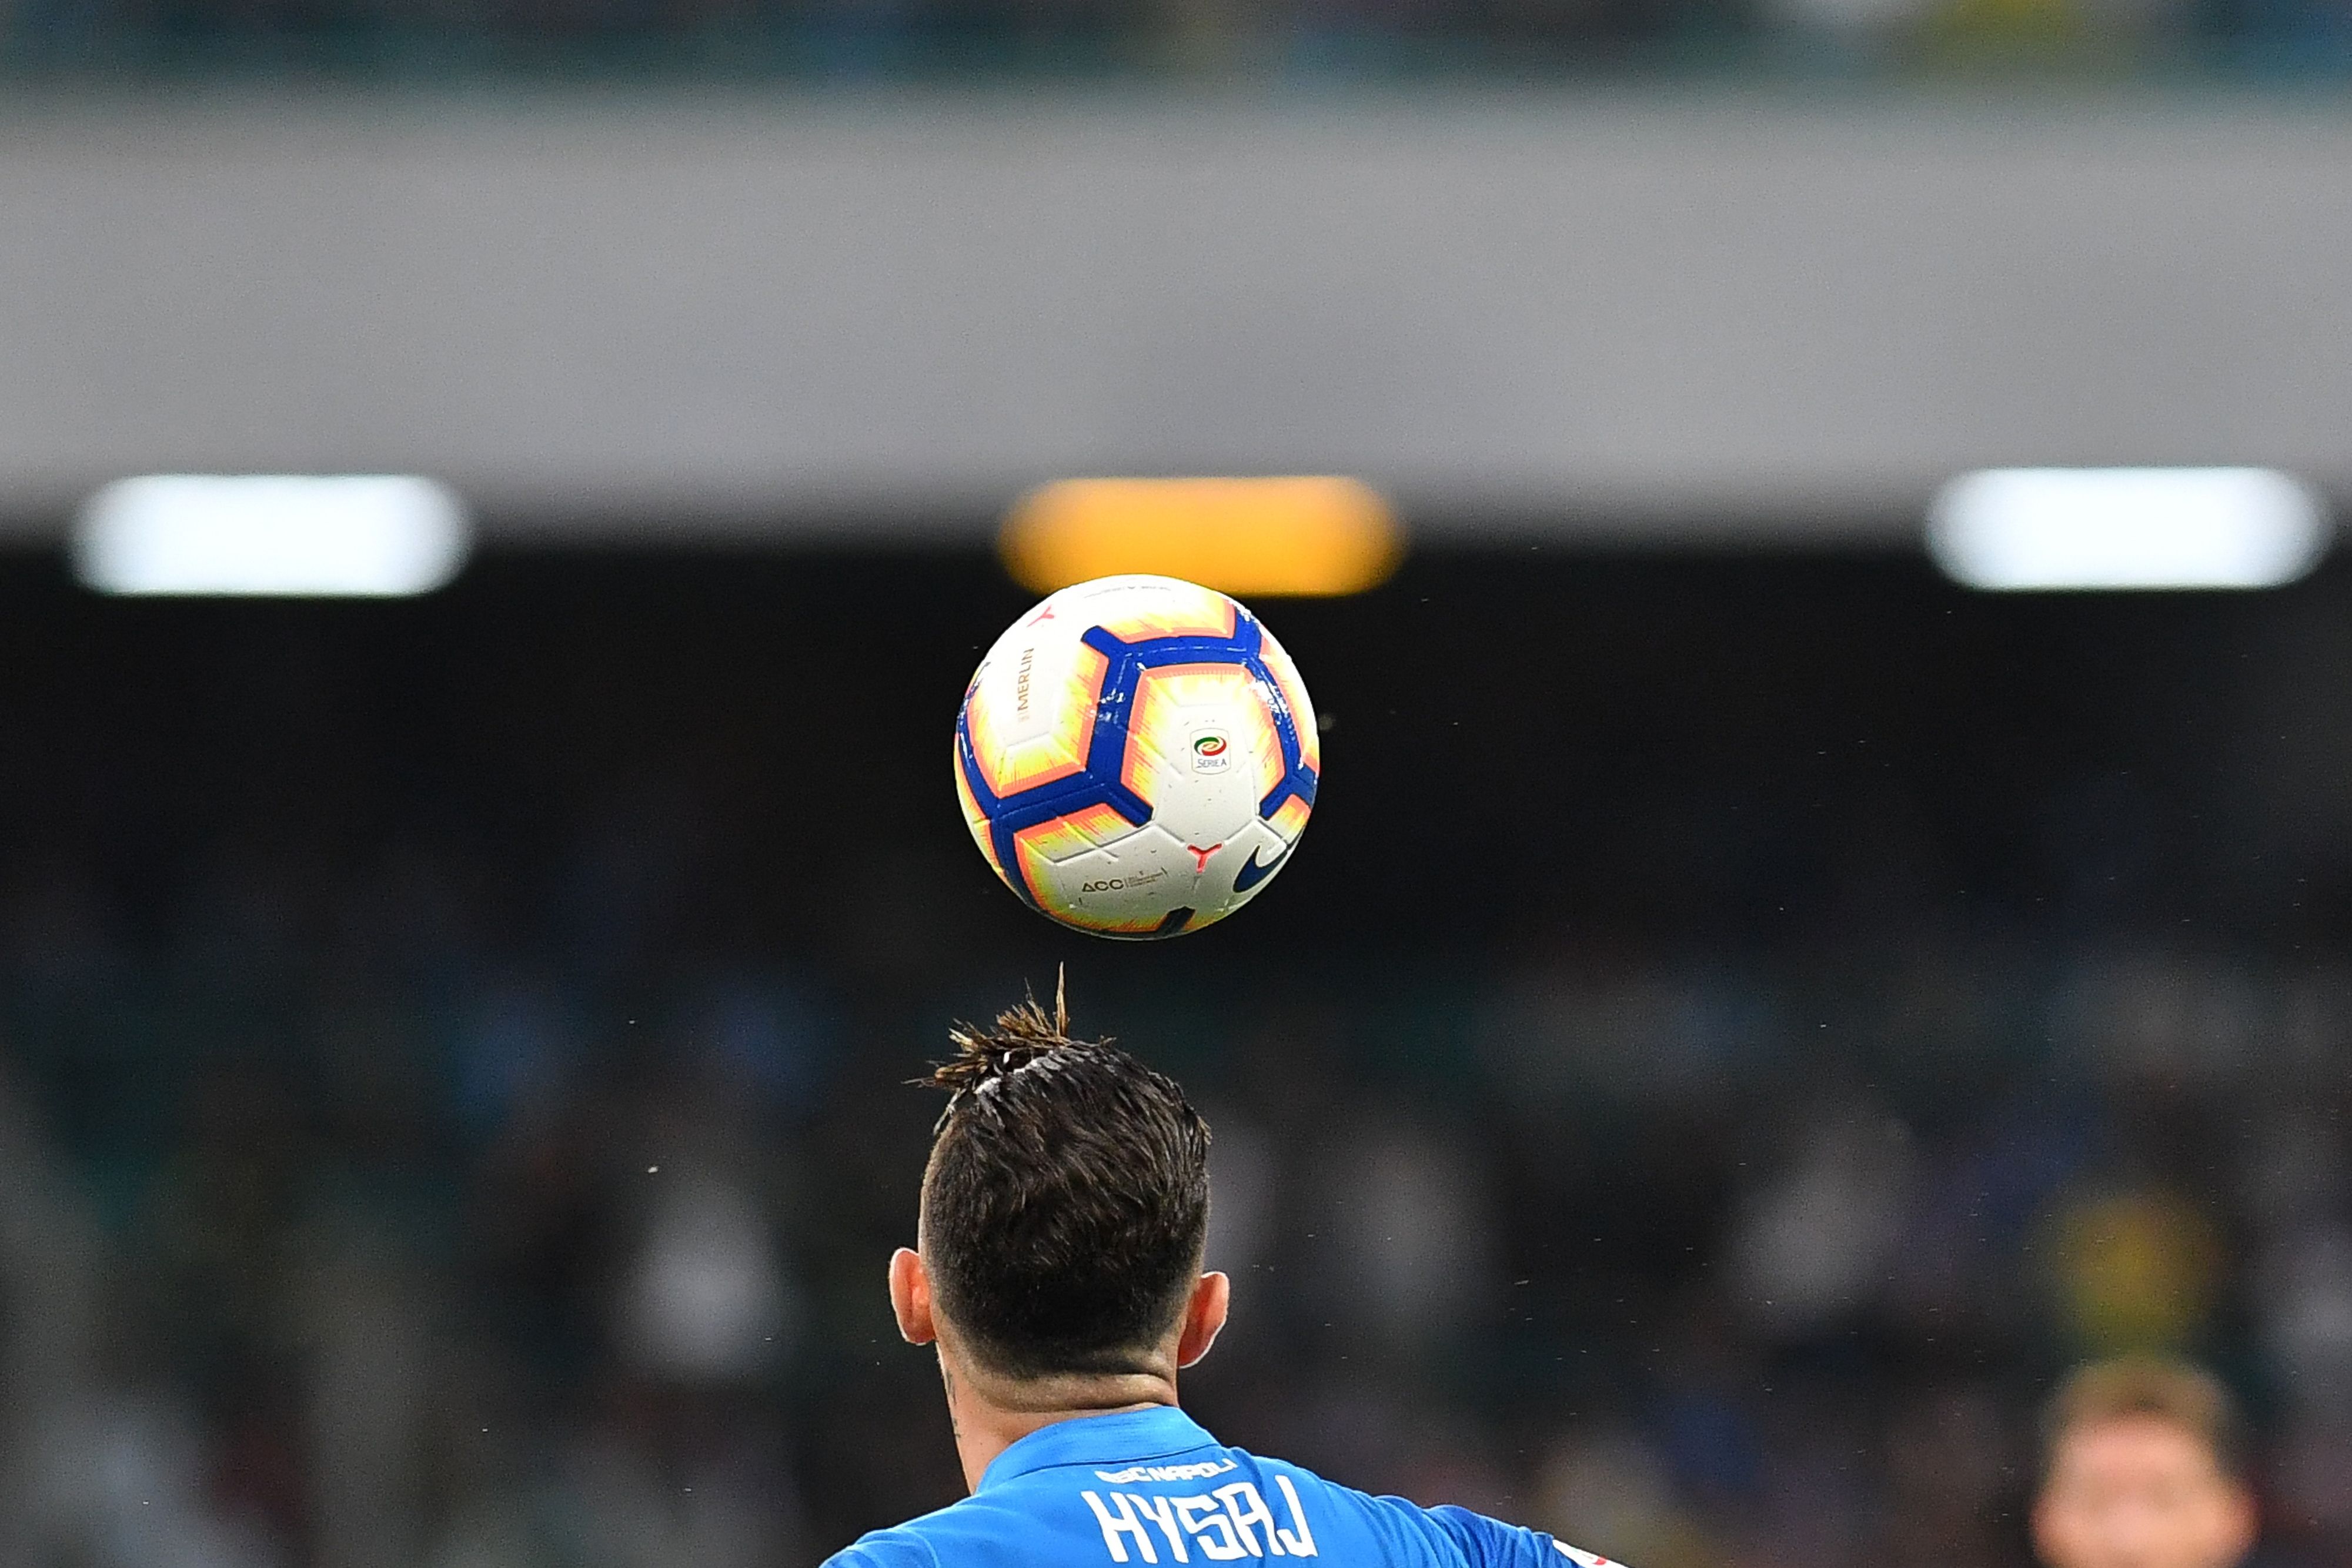 Napoli's Albanian defender Elseid Hysaj jumps for the ball during the Italian Serie A football match Napoli vs Sassuolo at the San Paolo Comunal Stadium in Naples, on October 7, 2018. (Photo by Andreas SOLARO / AFP)        (Photo credit should read ANDREAS SOLARO/AFP/Getty Images)